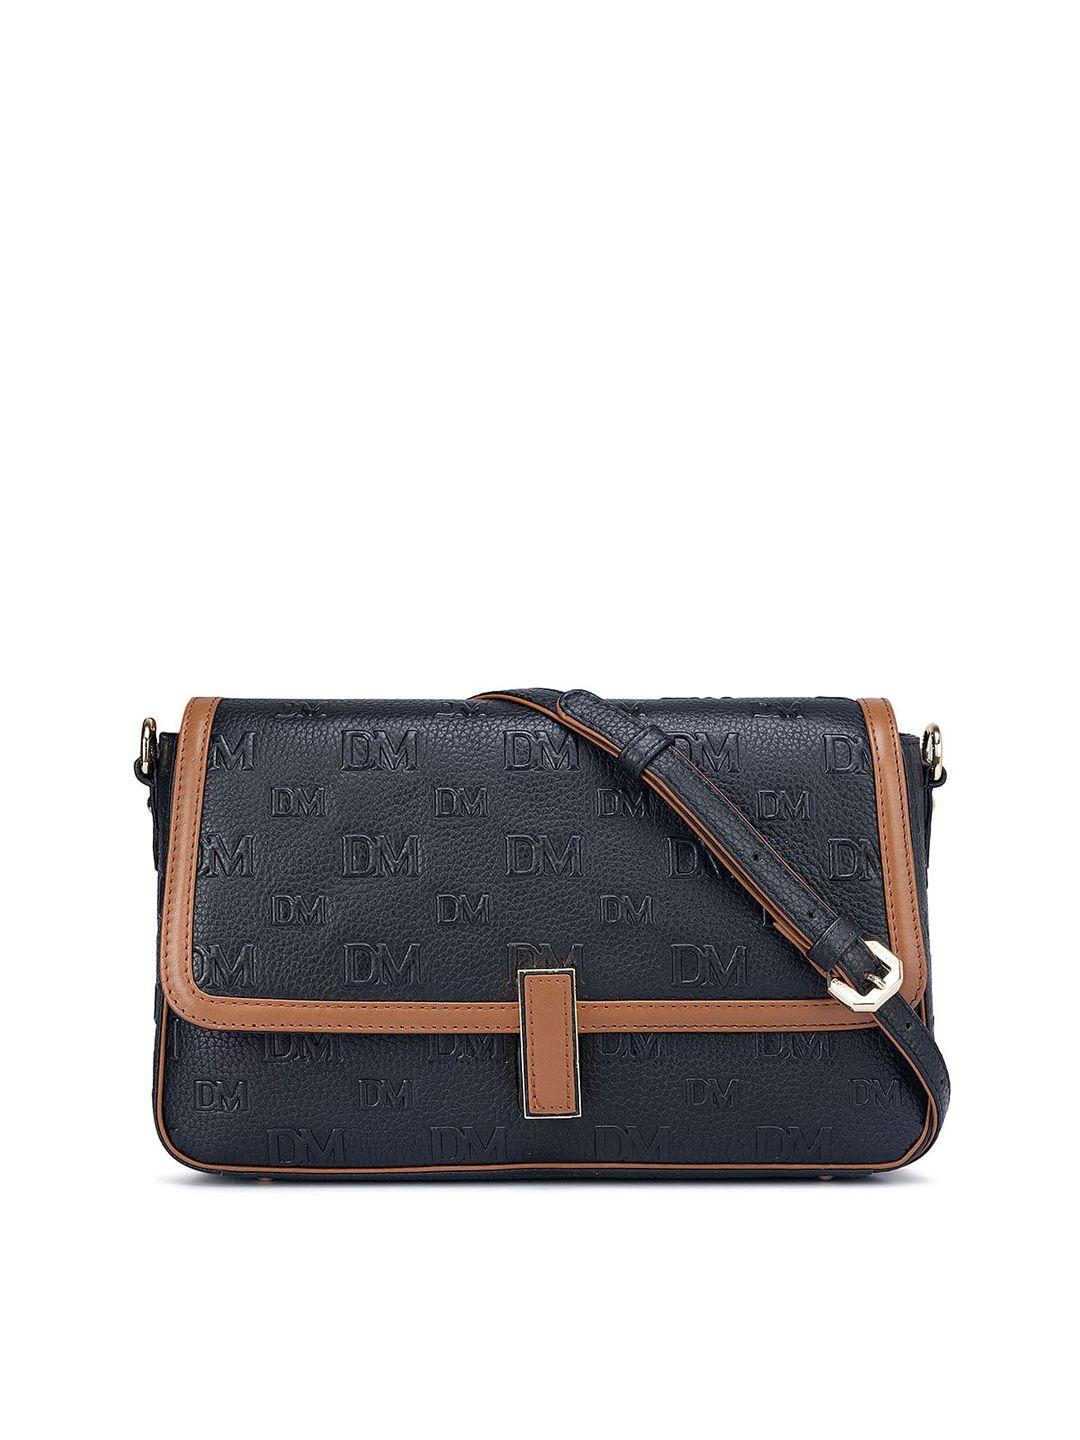 da milano printed leather structured sling bag